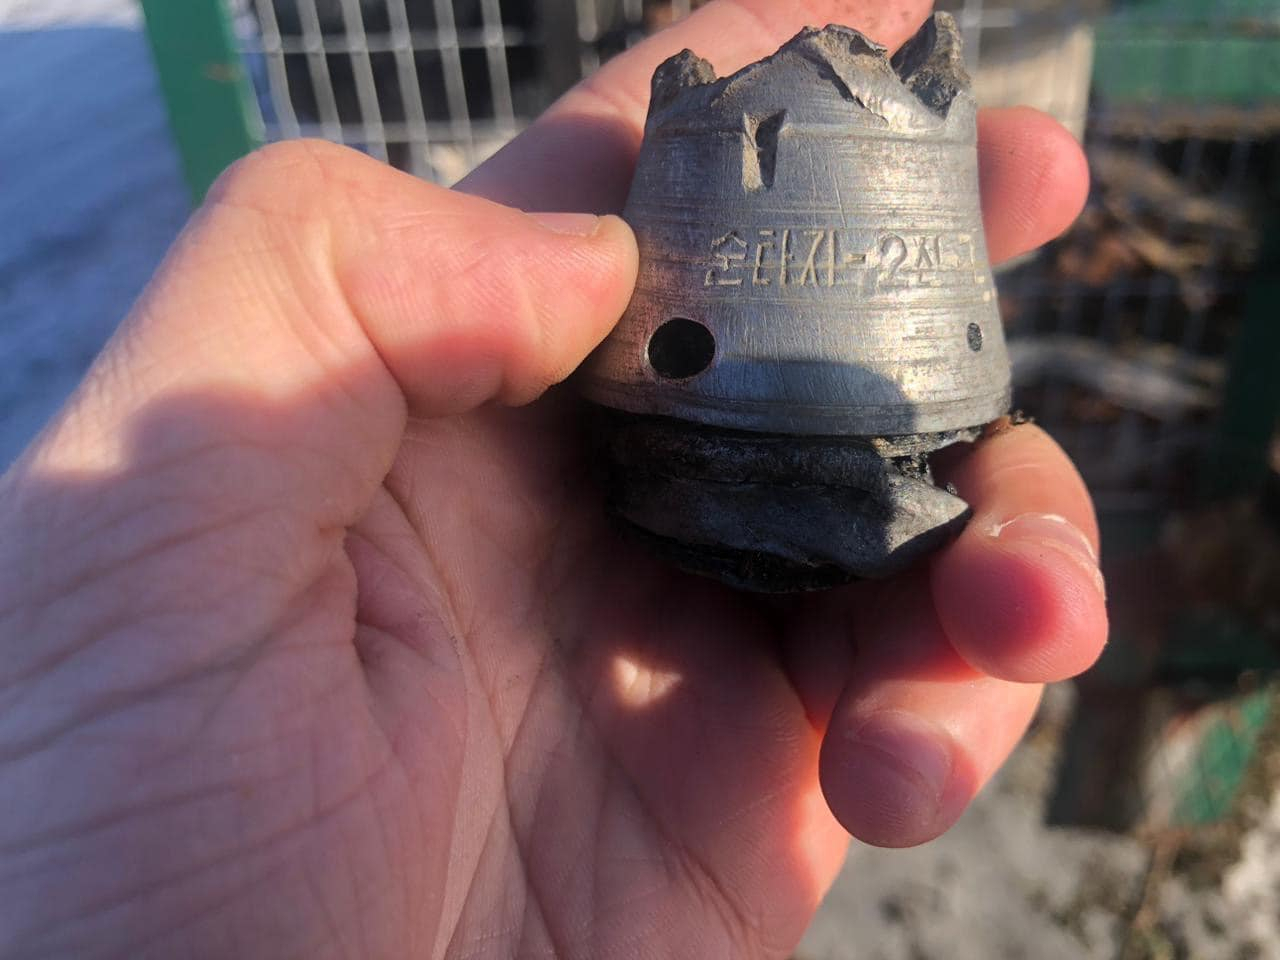 Sergei Bolvinov, a senior investigator for Ukrainian police, posted this photograph of what he says is a broken piece of a North Korean weapon on his Facebook on Wednesday.